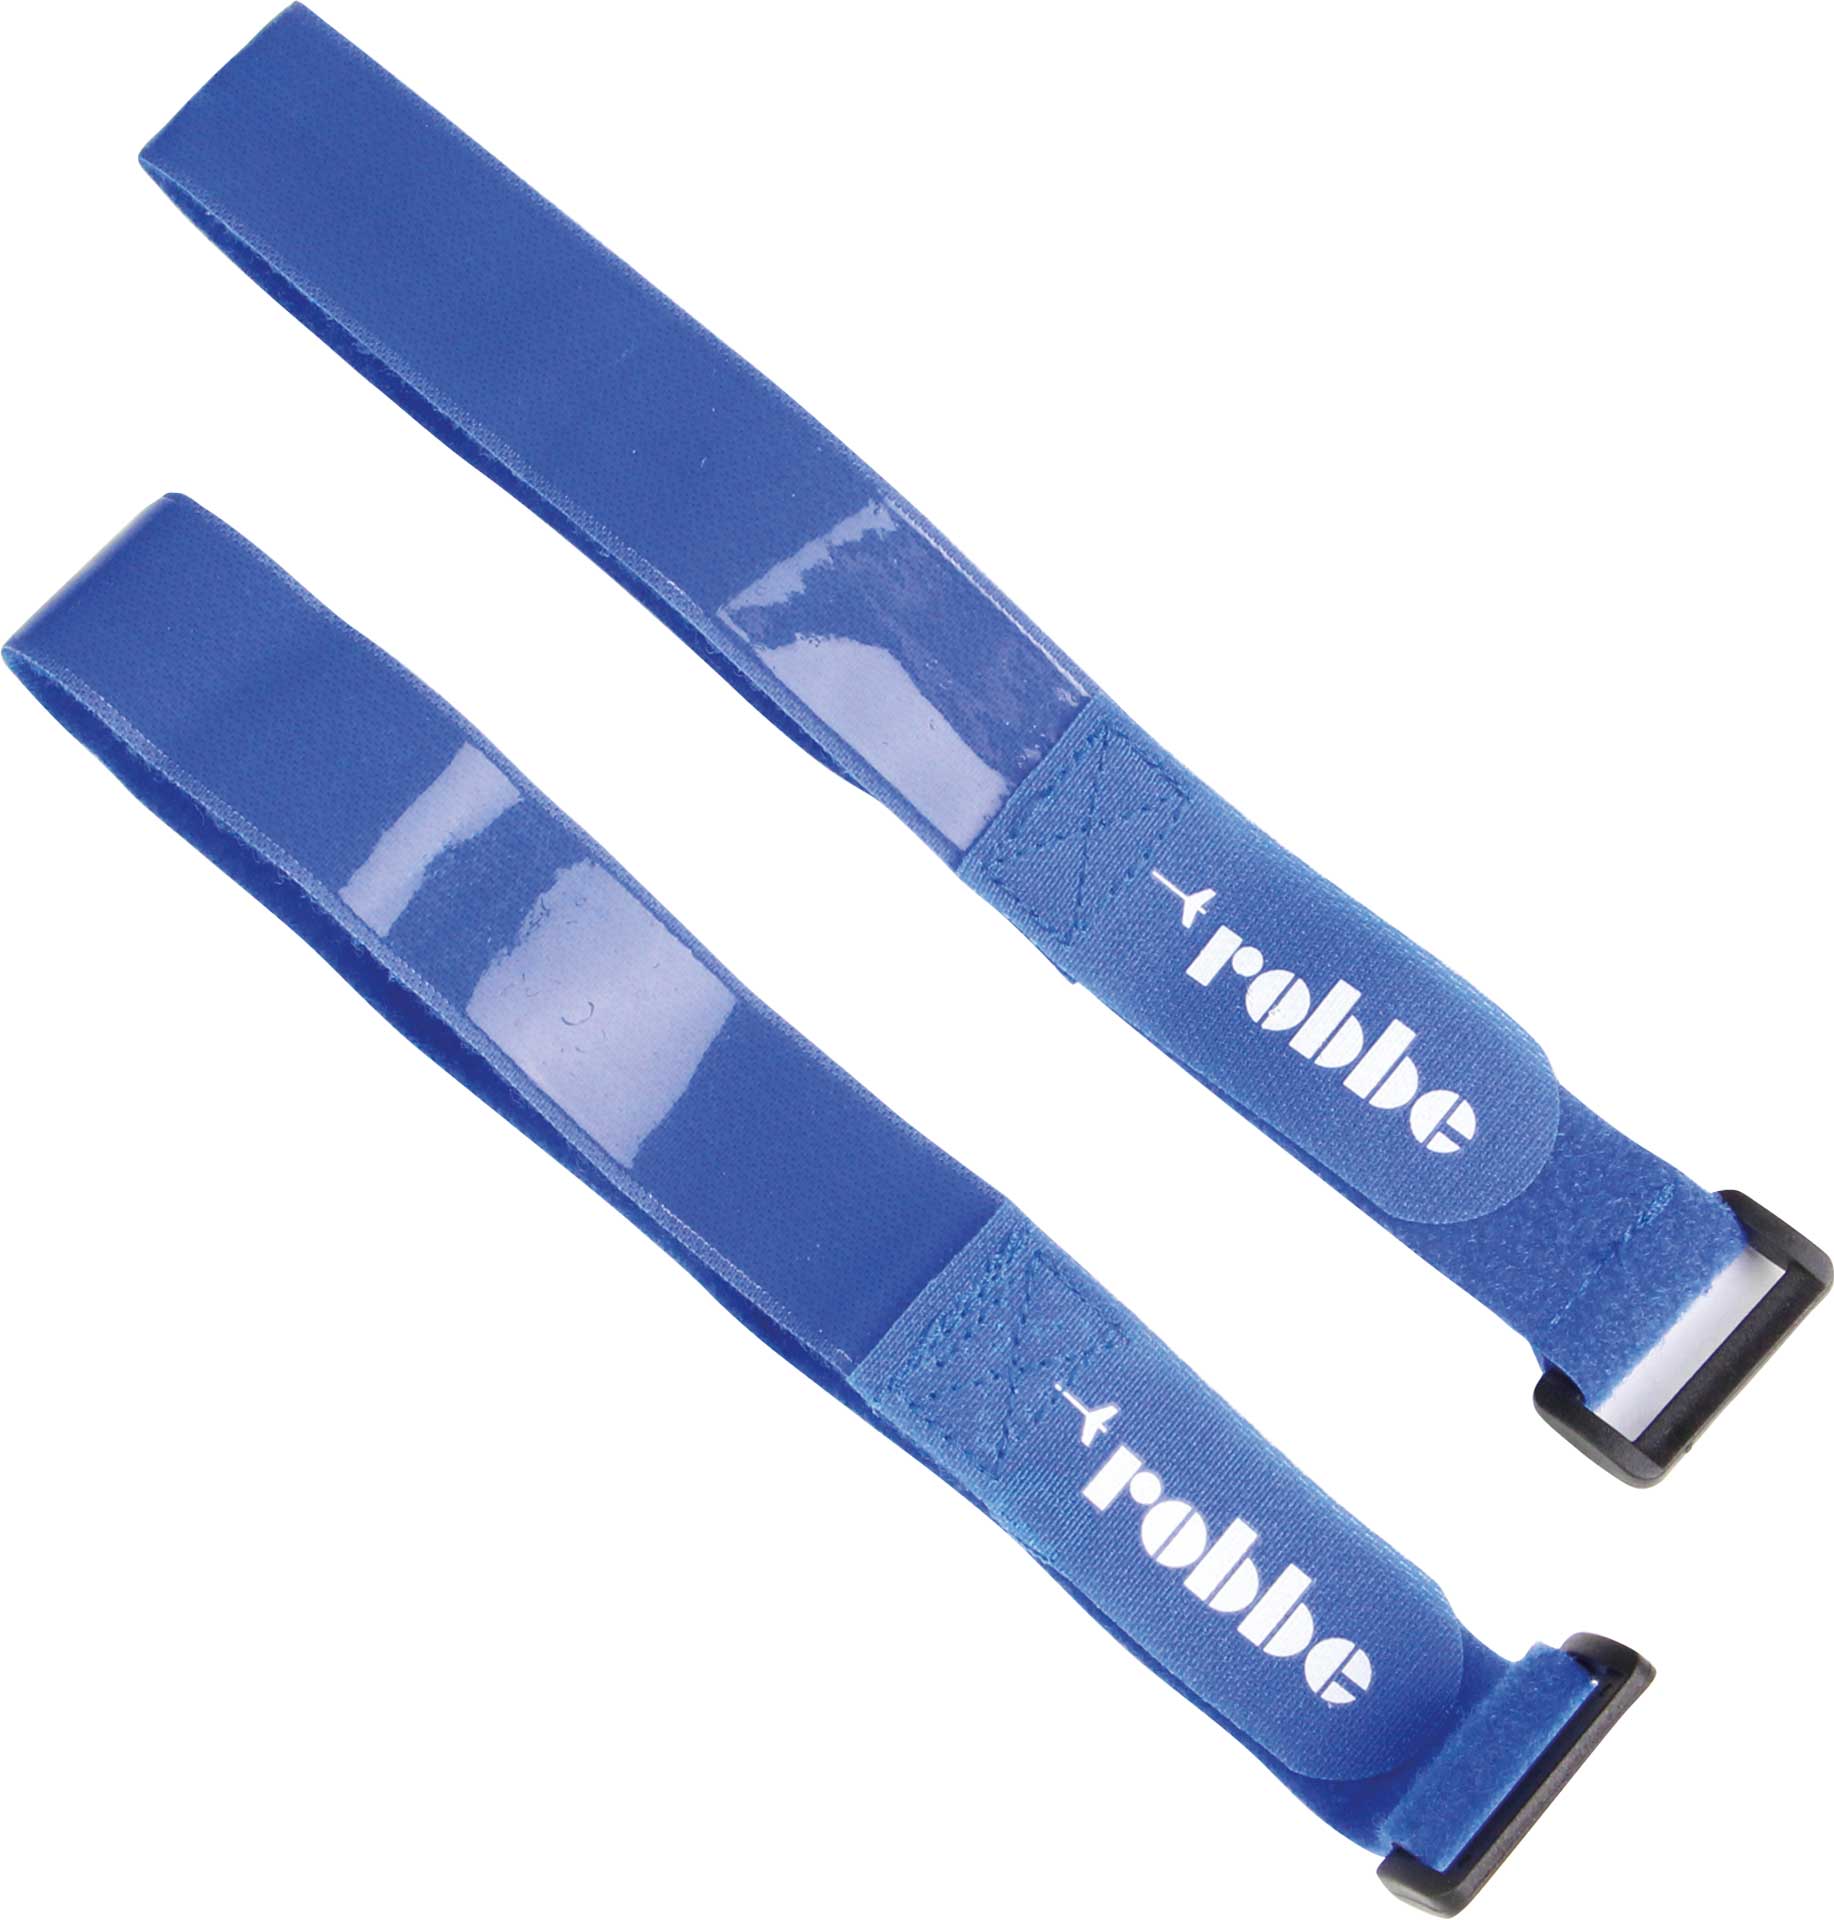 Robbe Modellsport Battery straps XL 30x500mm with with silicone pad (anti-slip) 2pcs.